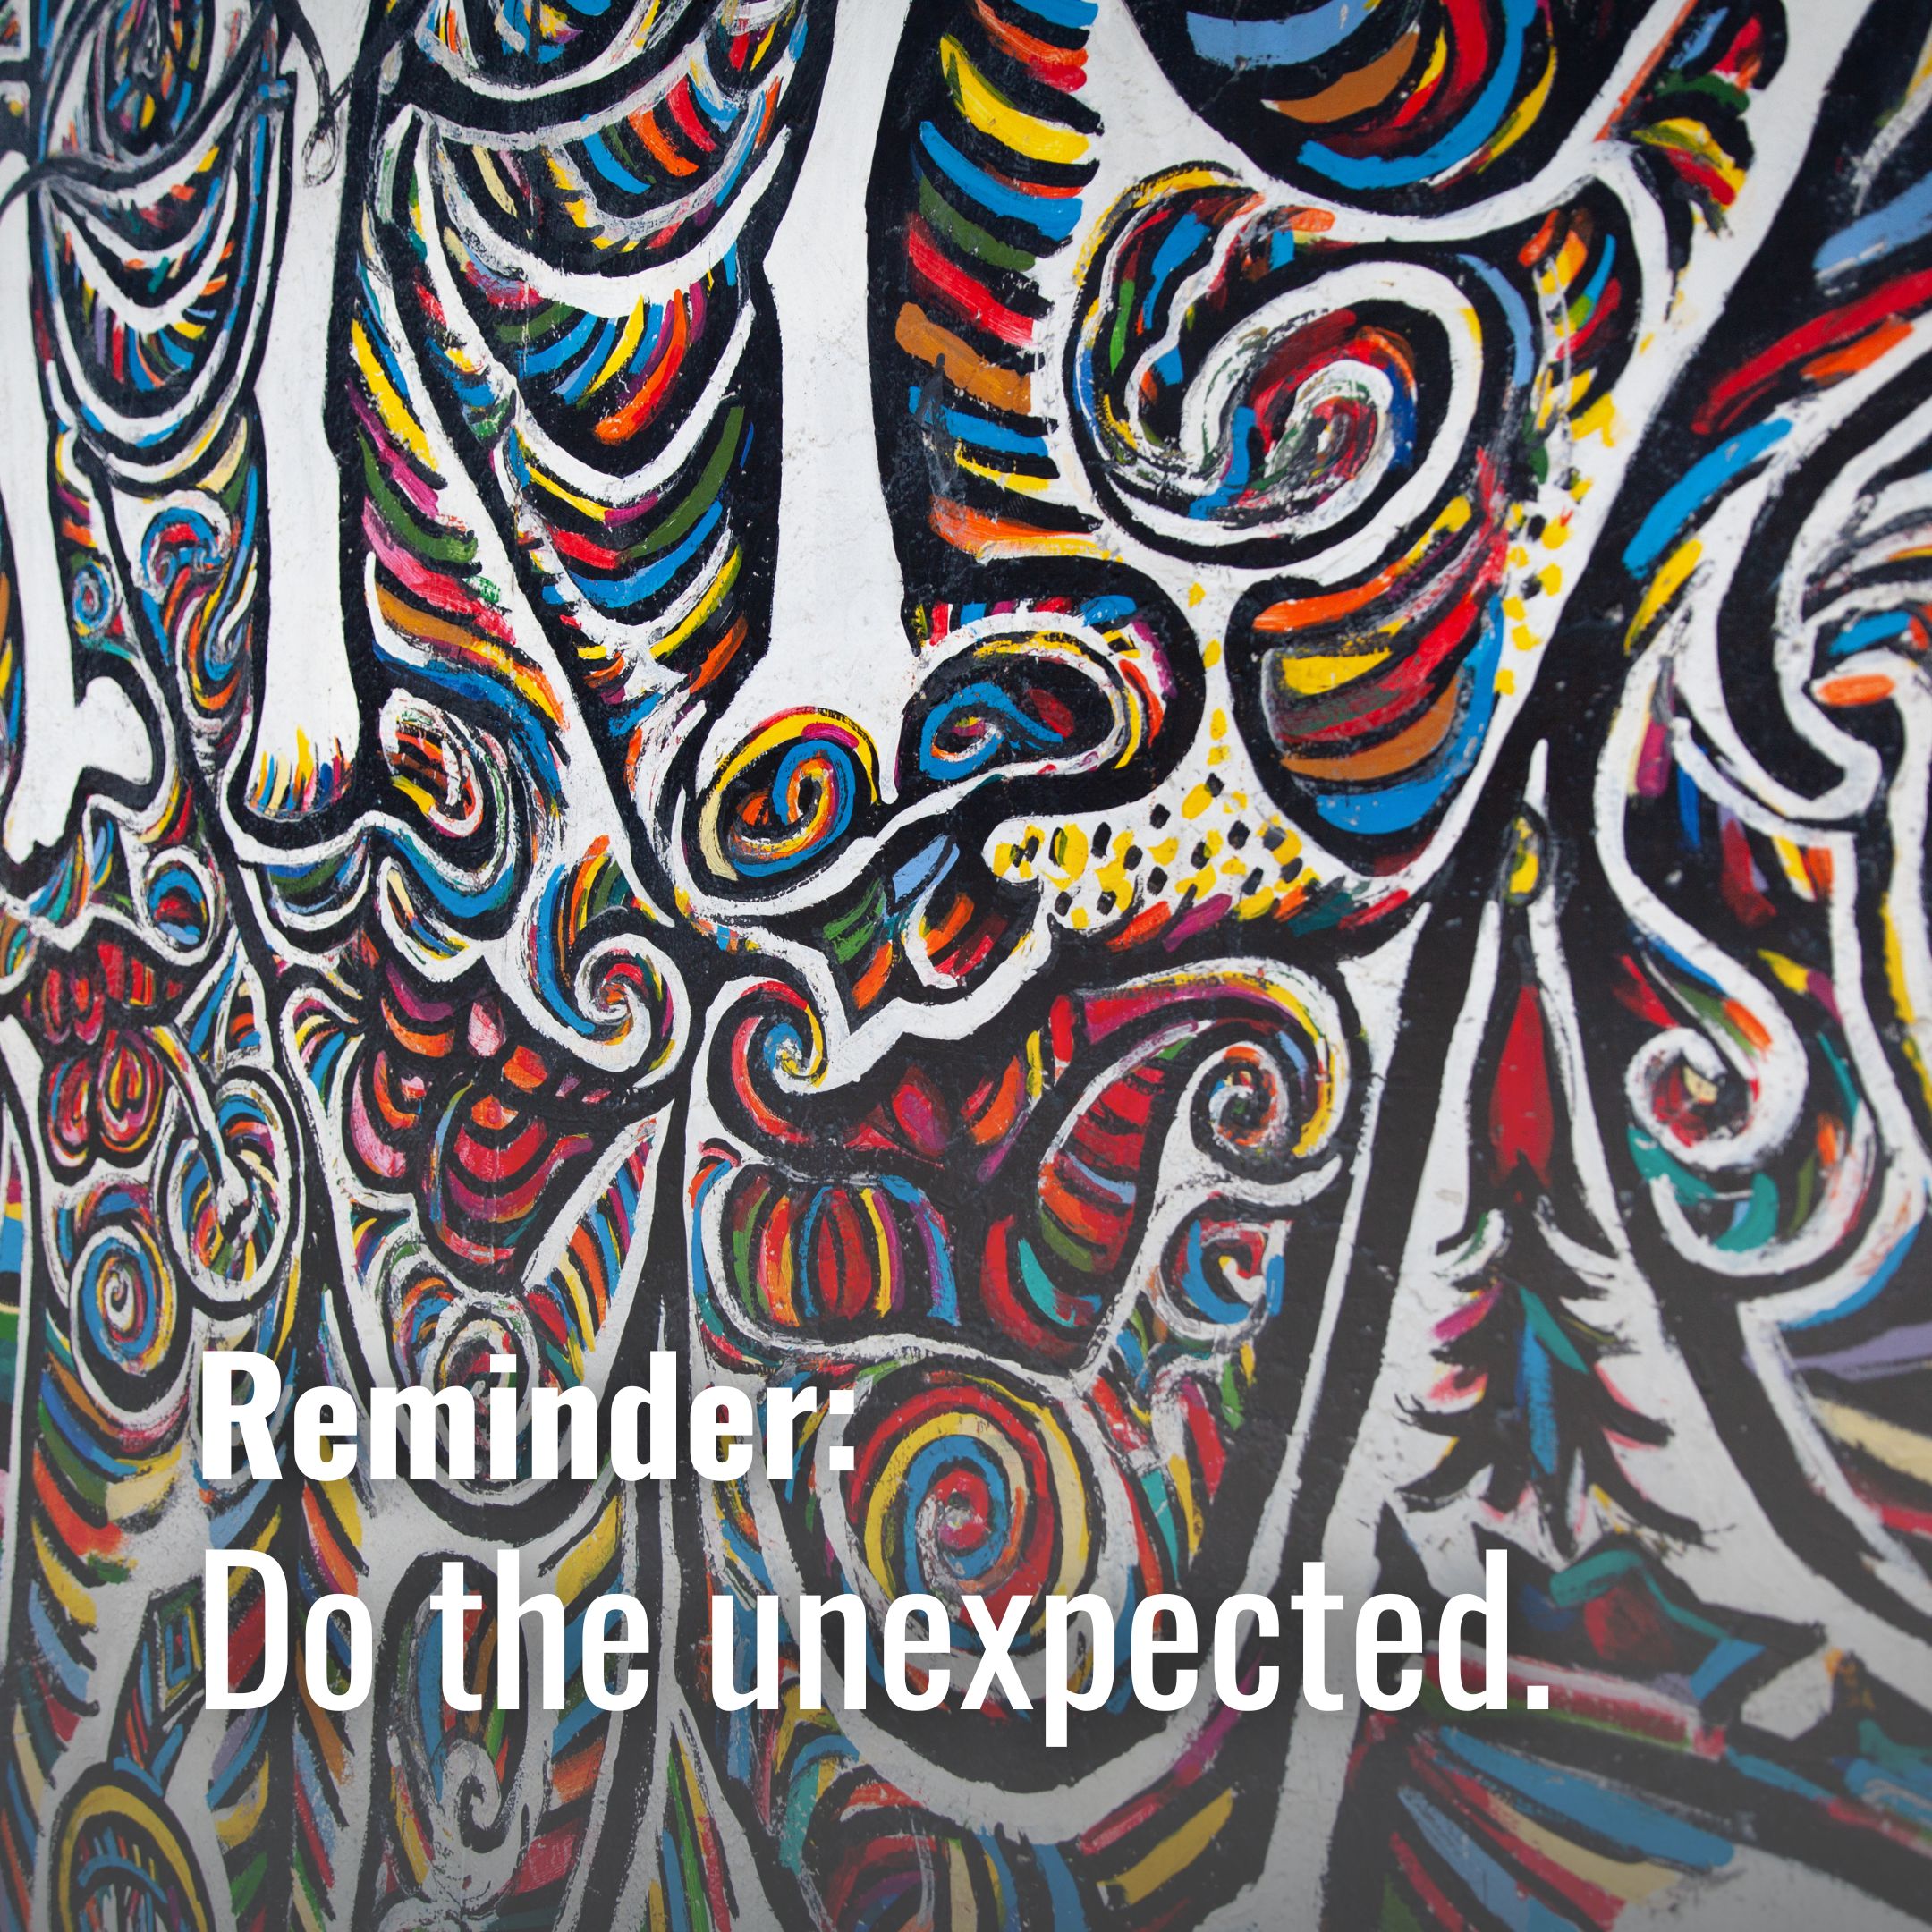 Do the unexpected.